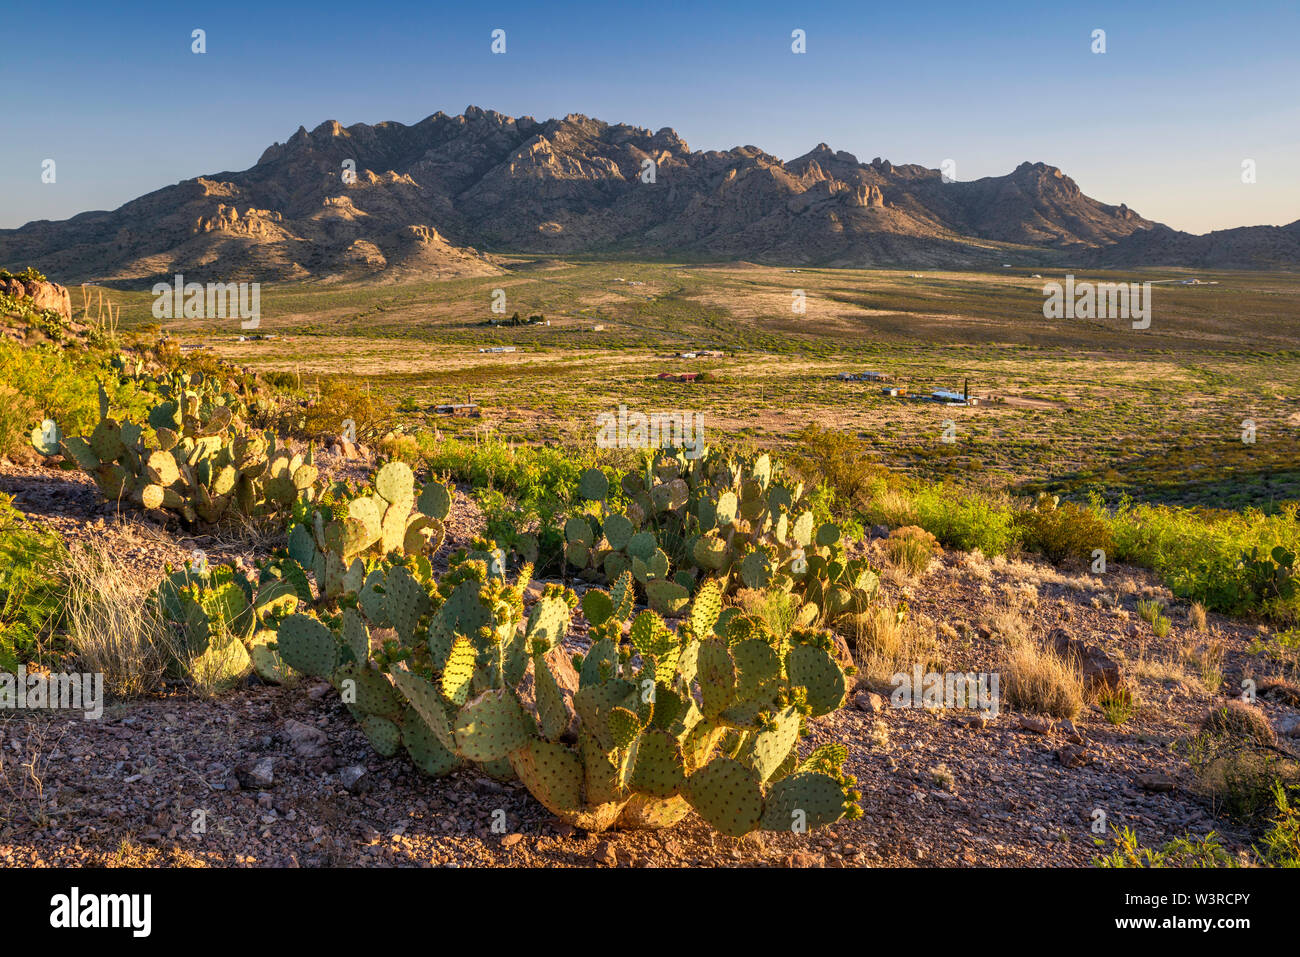 Florida Mountains, prickly pear cactus in foreground, Chihuahuan Desert, view from Rockhound State Park near Deming, New Mexico, USA Stock Photo